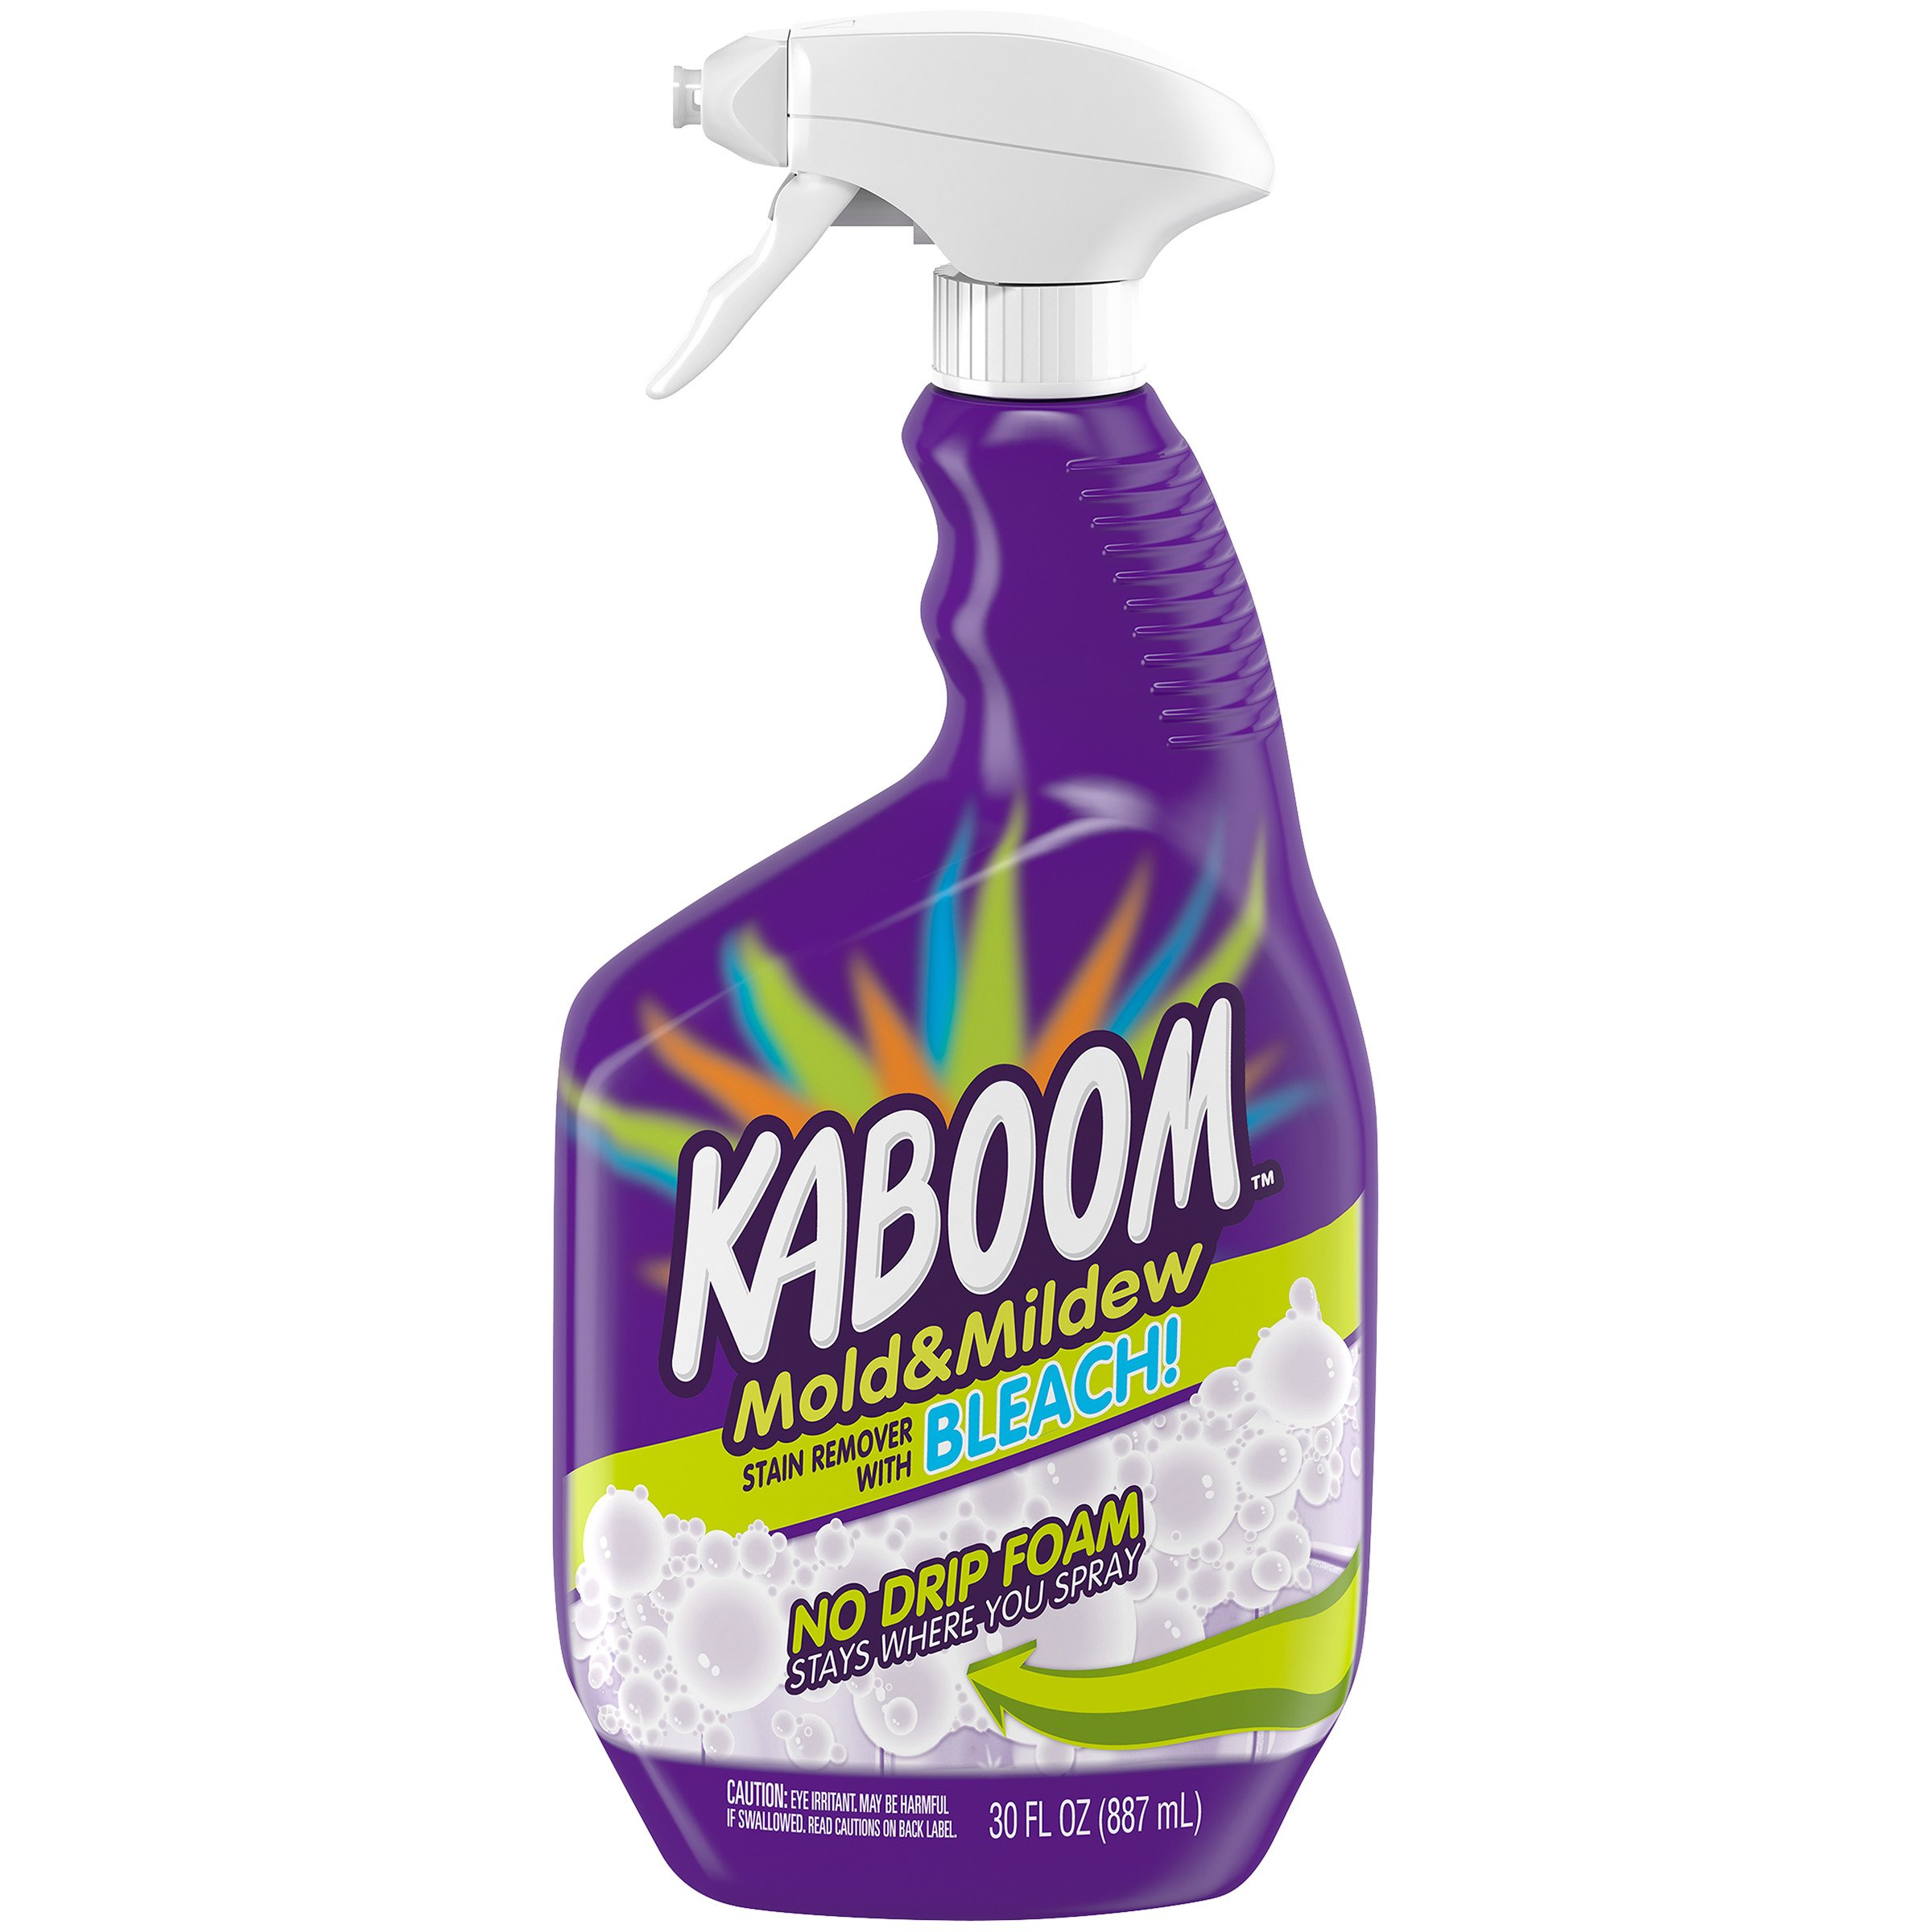 Kaboom Mold &  Mildew Stain Remover with Bleach No Drip ...